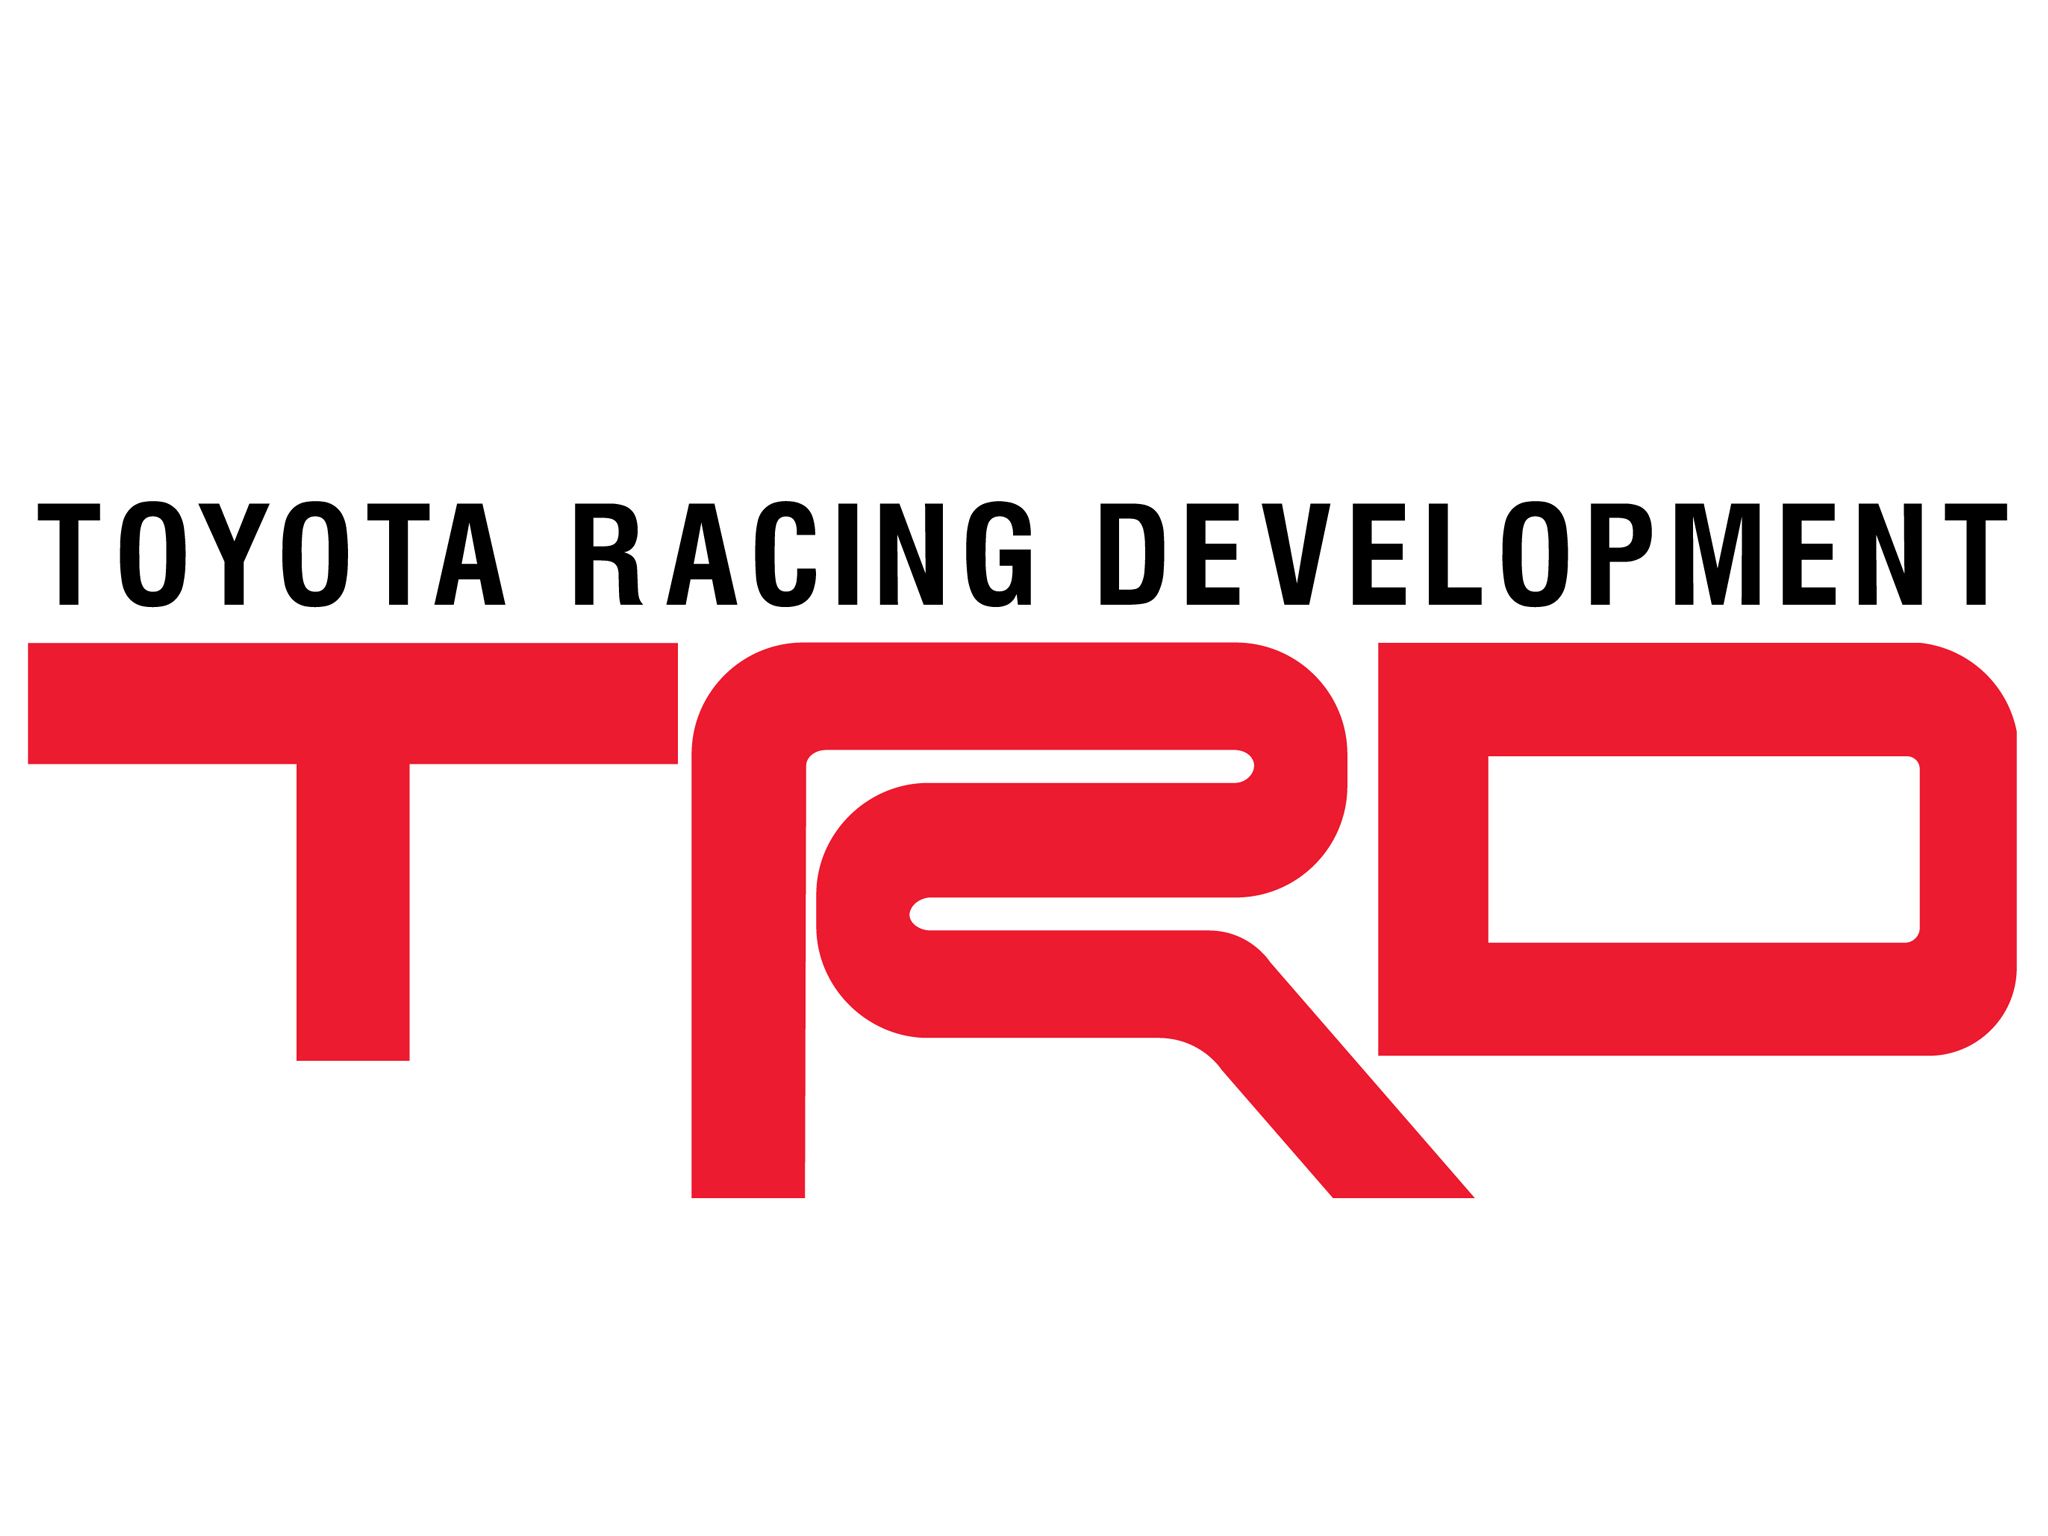 What is TRD?